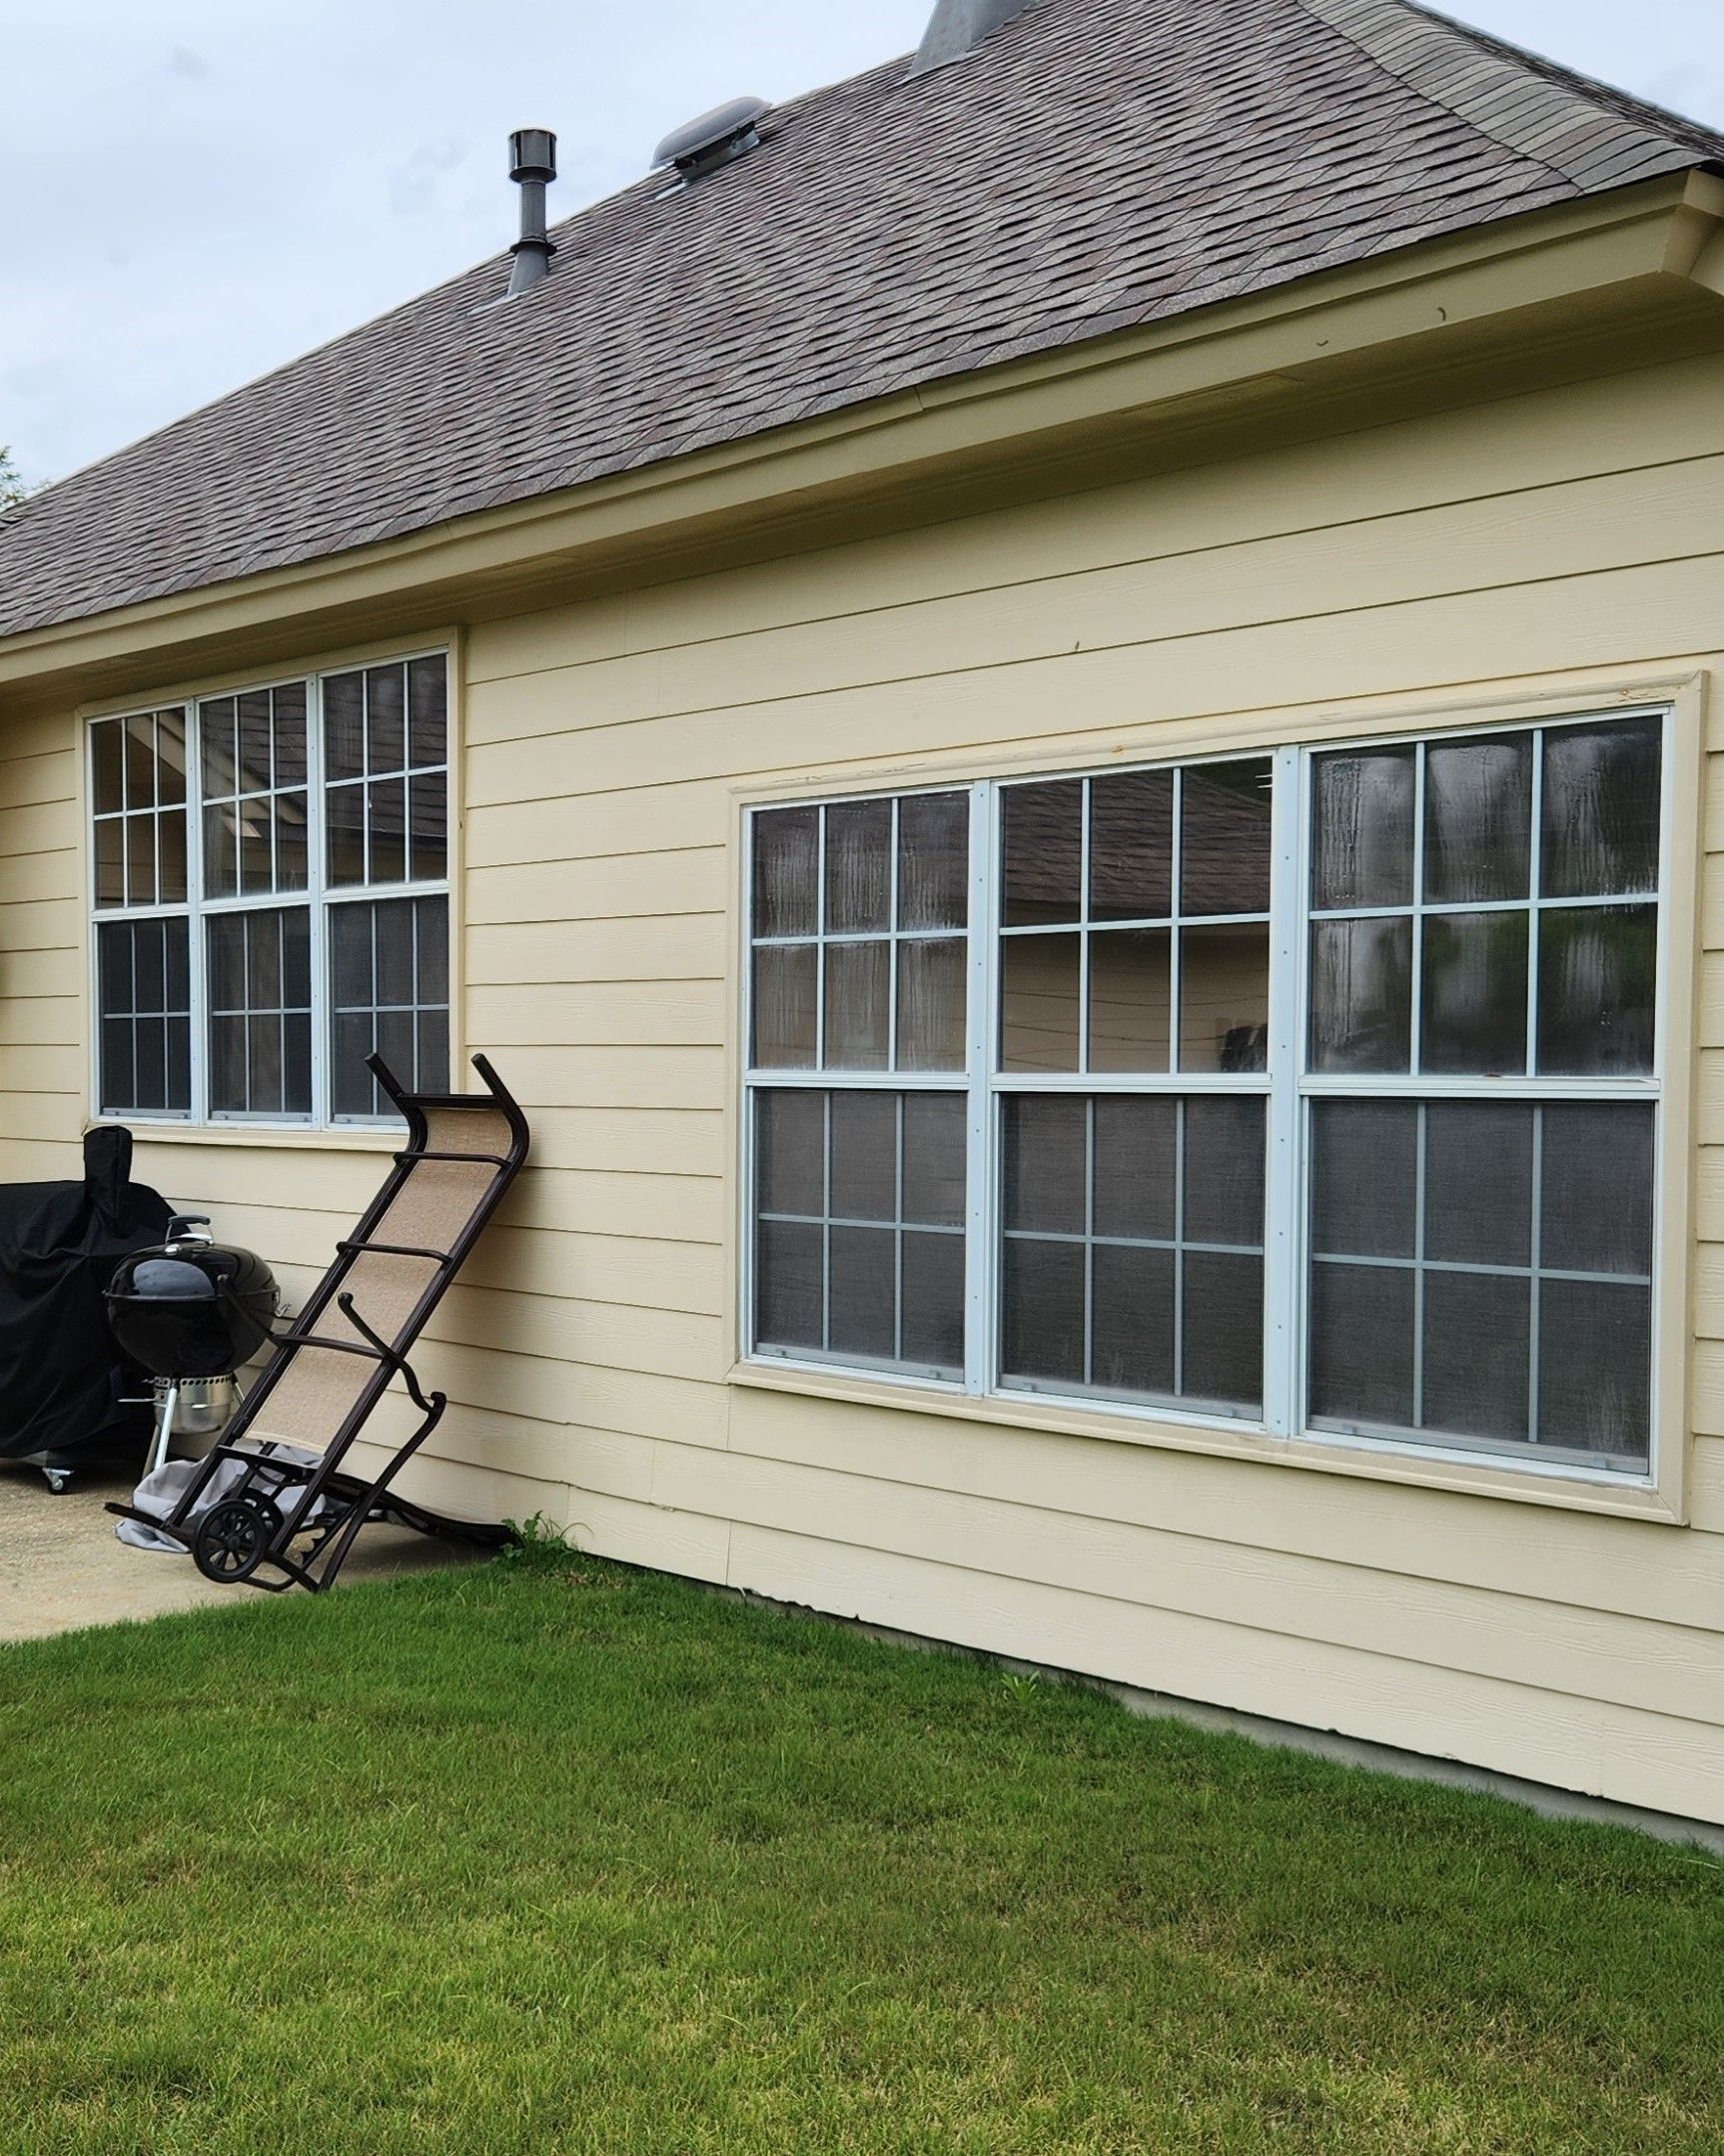 residential tint Montgomery - SPF Home Tint adds top energy saving ability to home windows in Montgomery, AL.